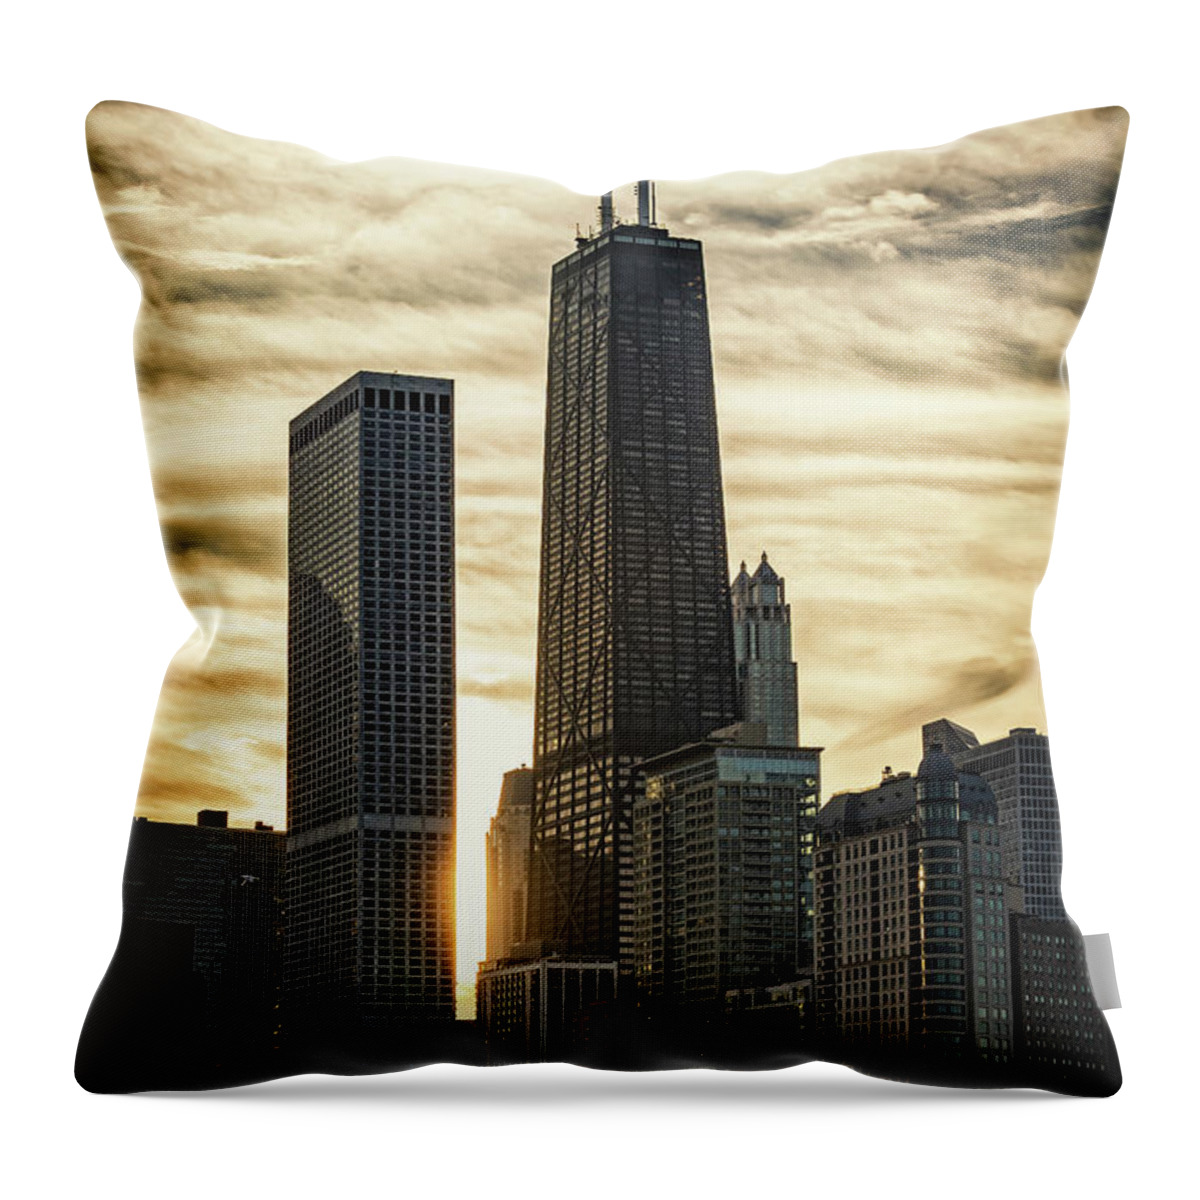 Chicago Throw Pillow featuring the photograph Chicago Sunset by Bruno Passigatti